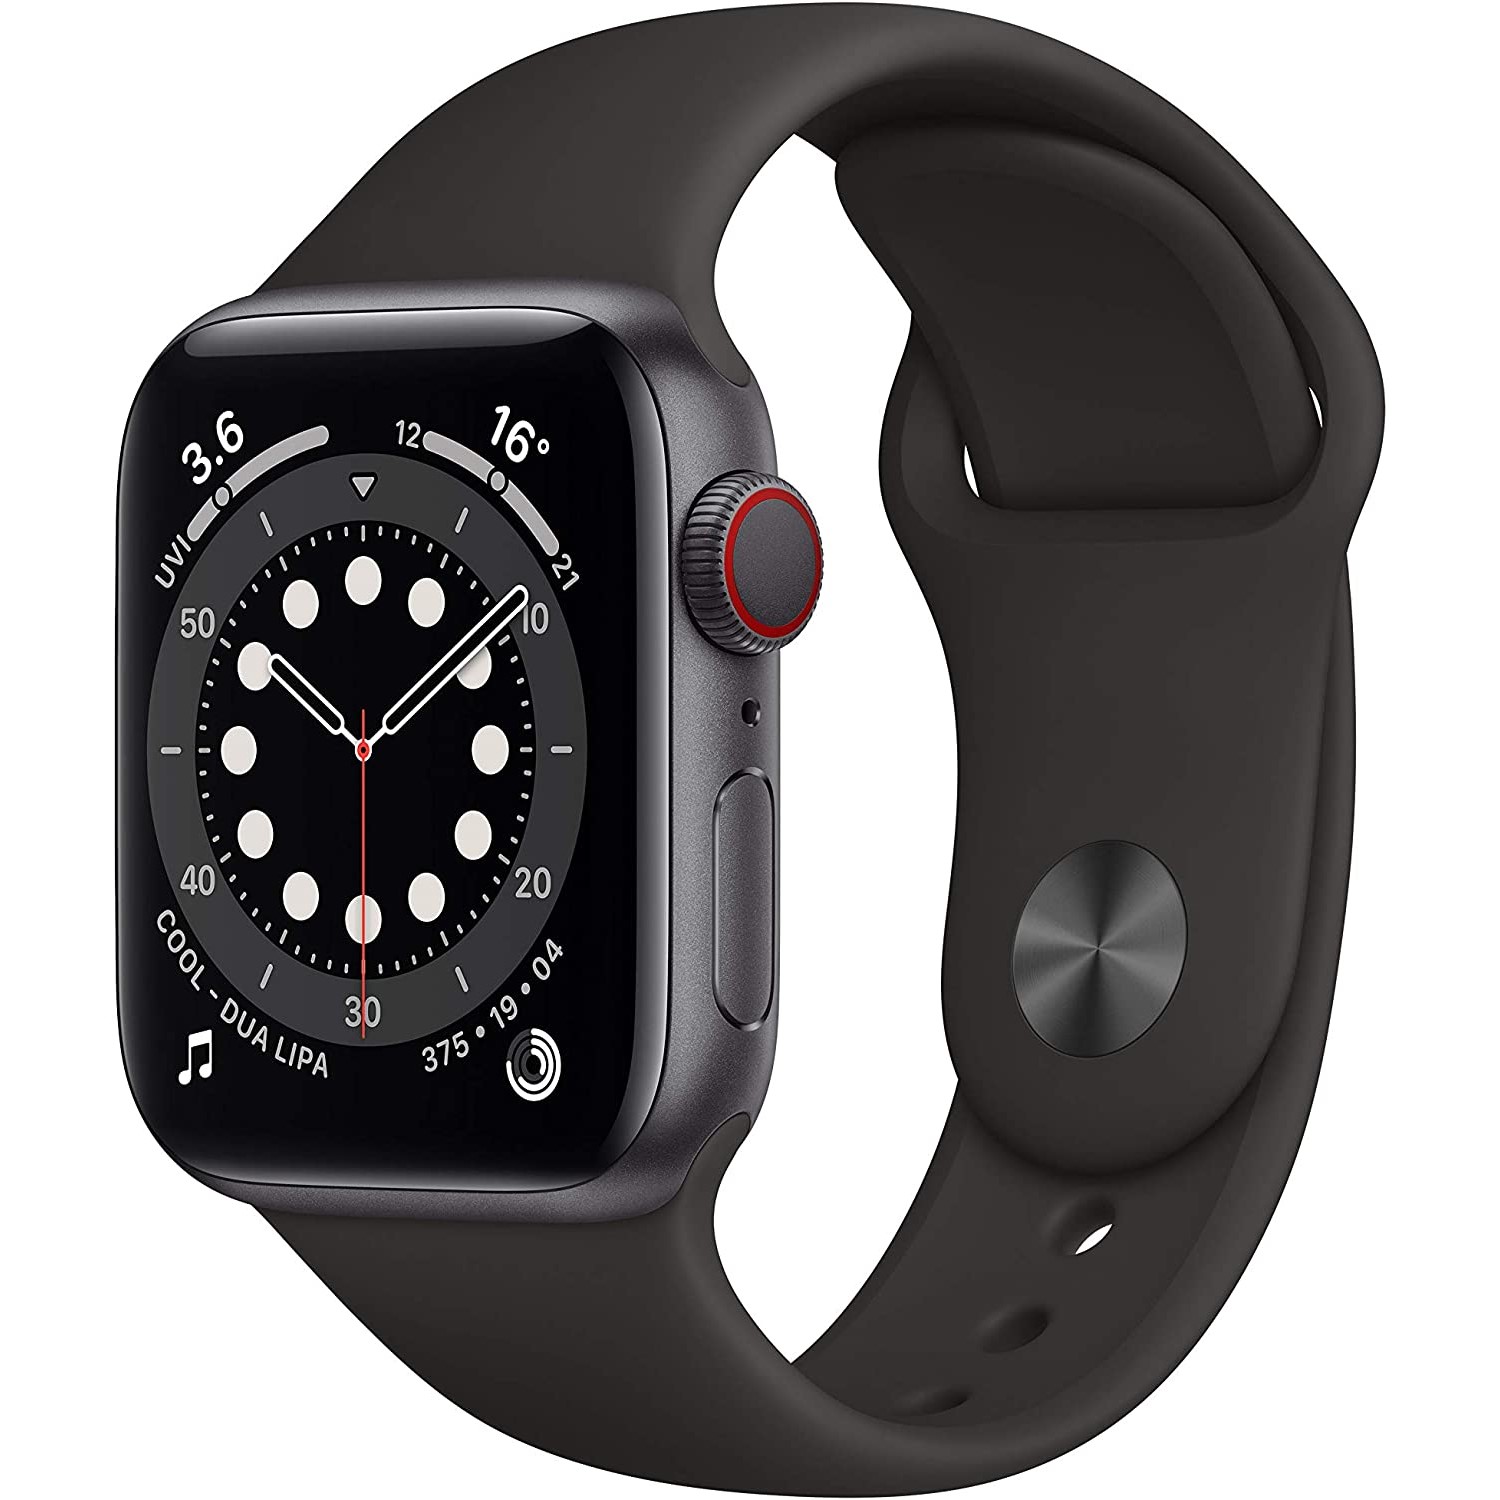 Apple Watch Series 6 GPS + Cellular - 40mm Graphite Stainless Steel Case with Black Sport Band - Reg